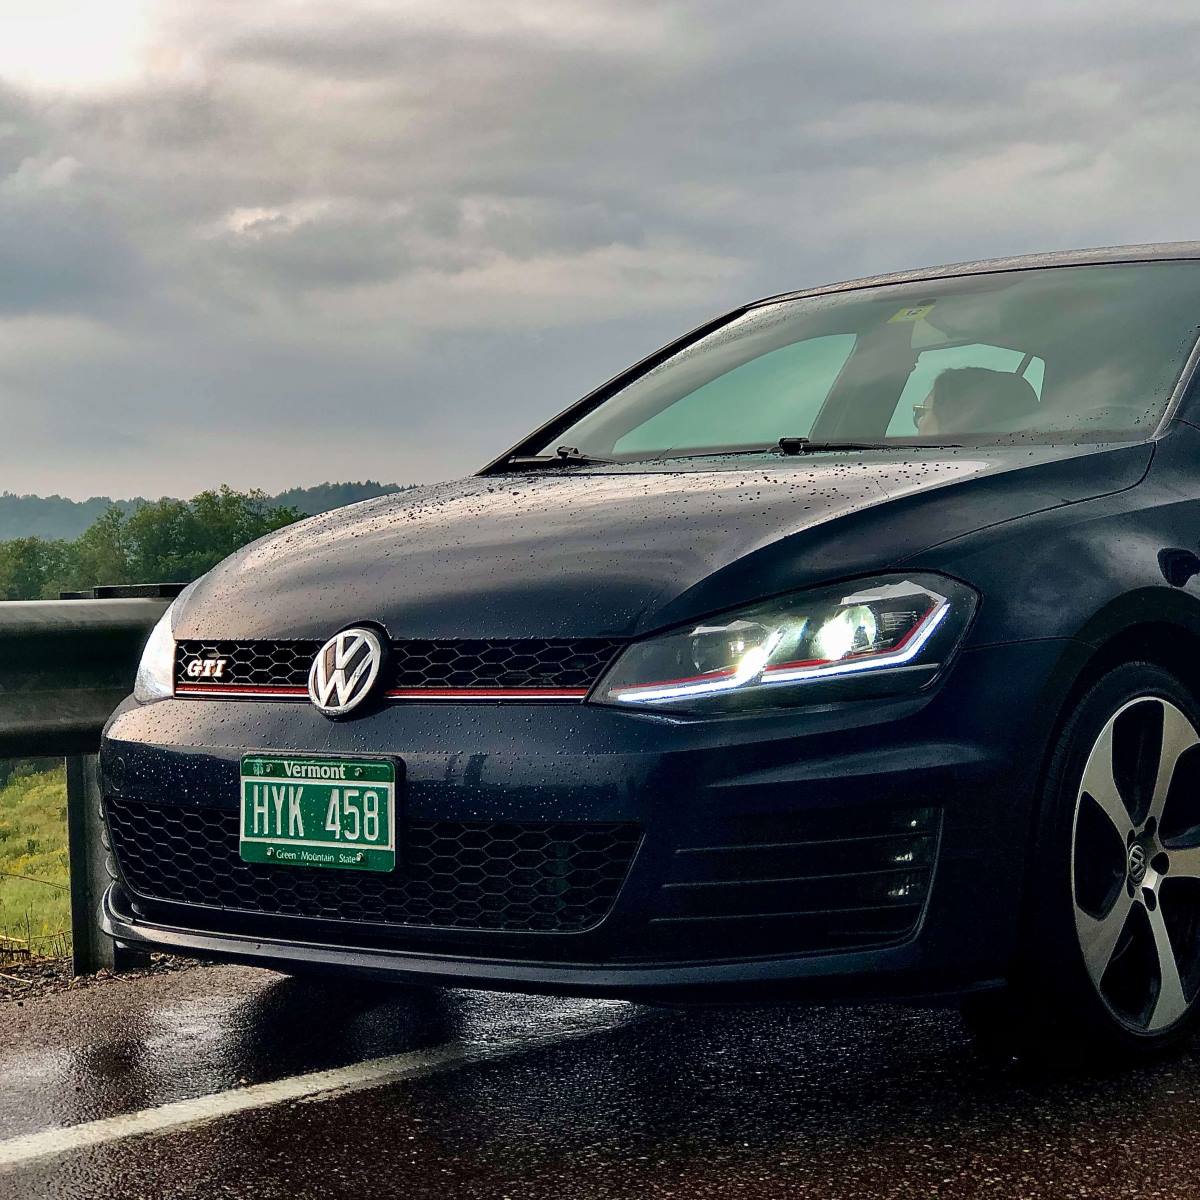 The front of a MK7 Golf GTI, one of the best road trip cars